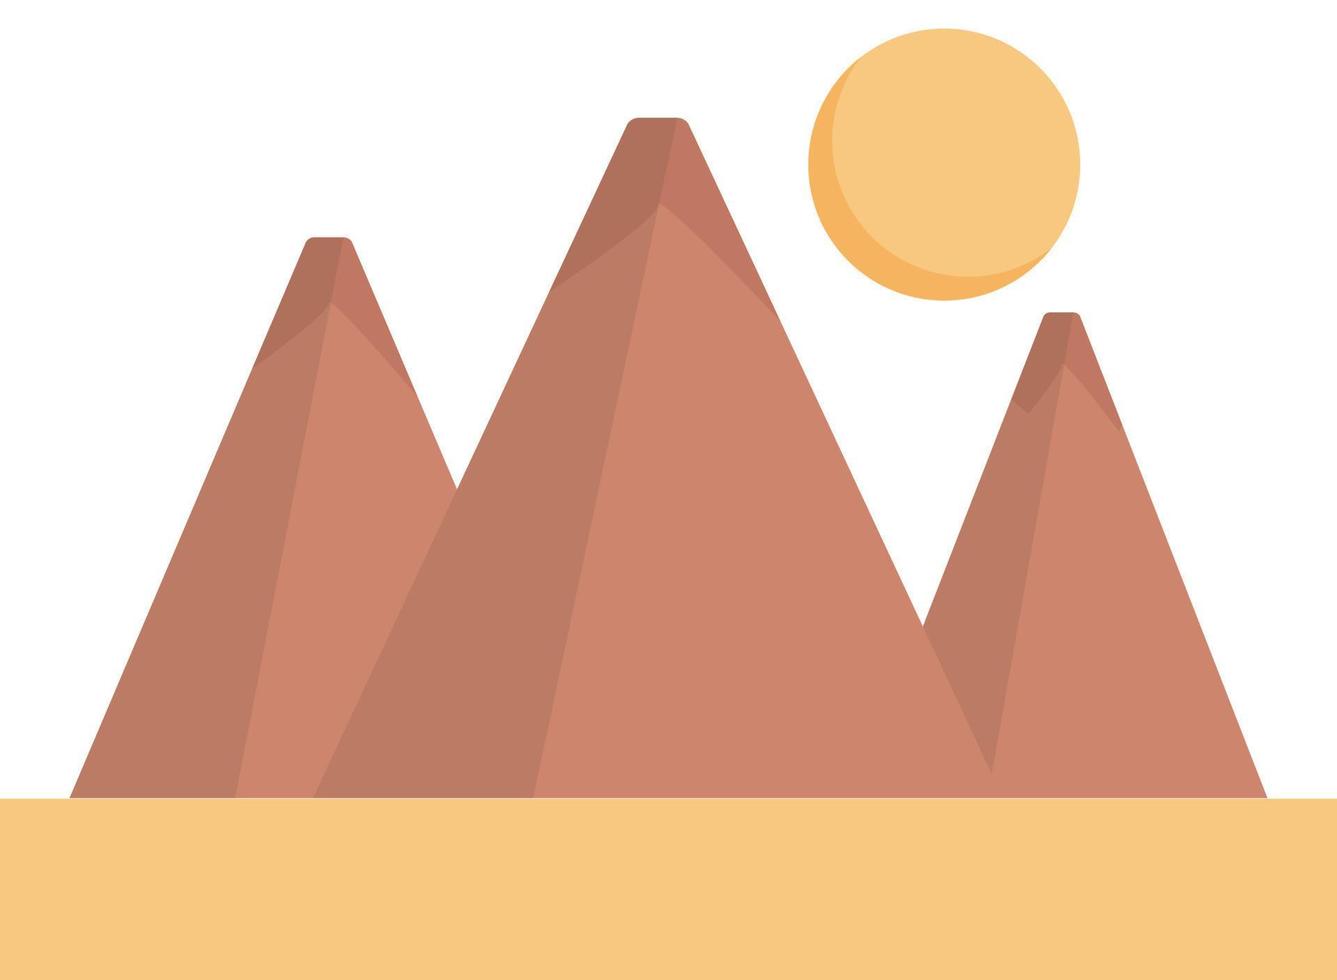 pyramid vector illustration on a background.Premium quality symbols.vector icons for concept and graphic design.